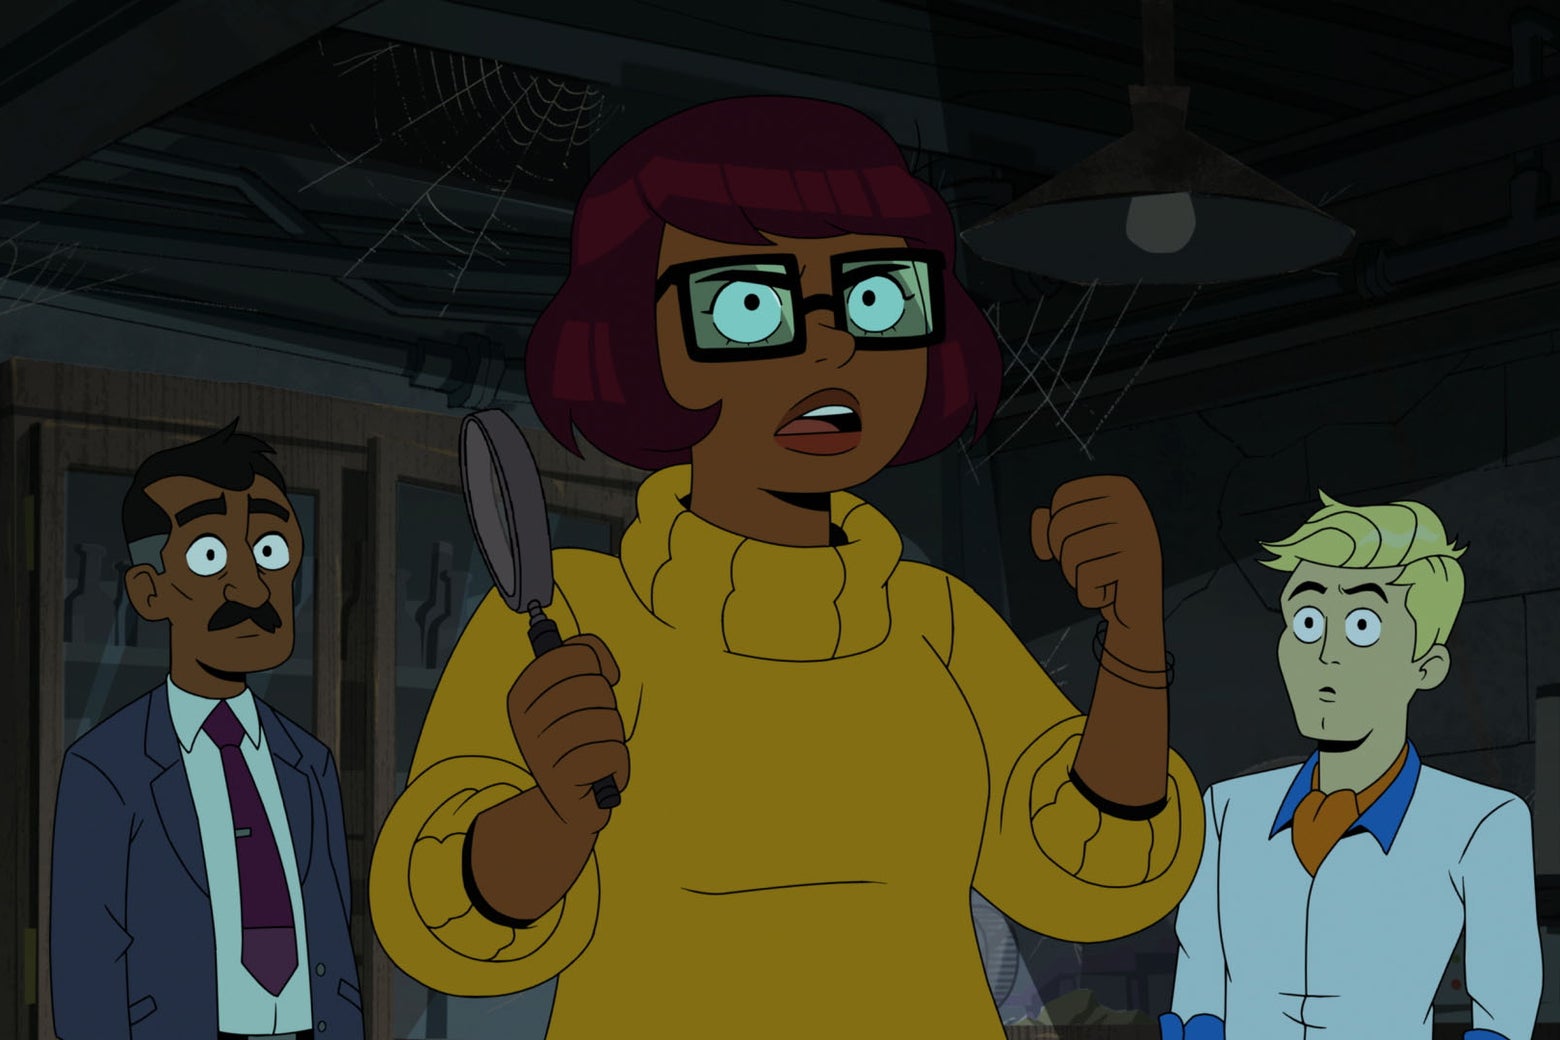 Rr) Rotten Tomatoes HBO Max's new animated series #Velma will feature the  voices of Mindy Kaling